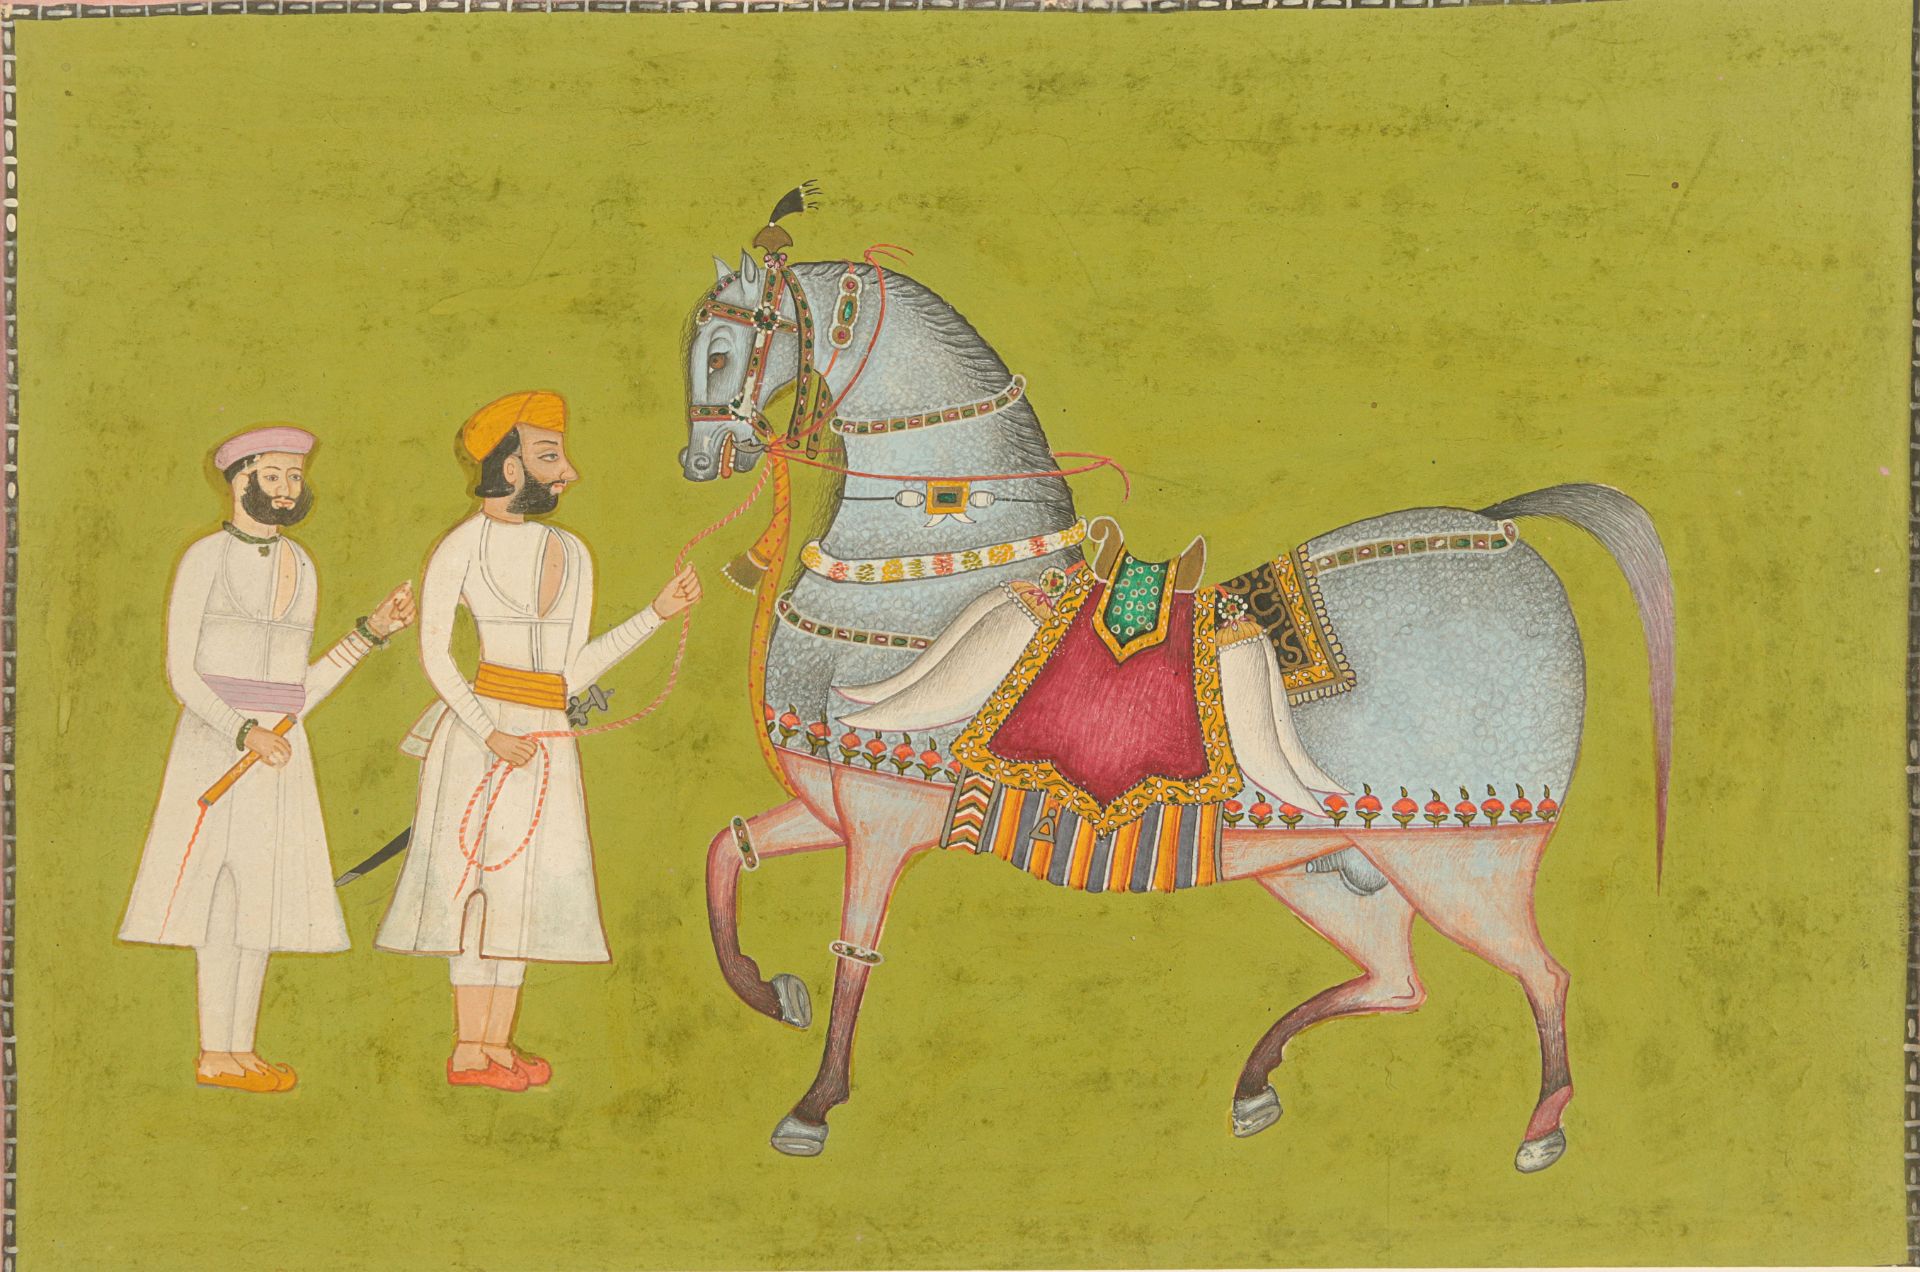 A painting of a prince with caparisoned horse and servant, Northern India, c. 1820 ~1850.